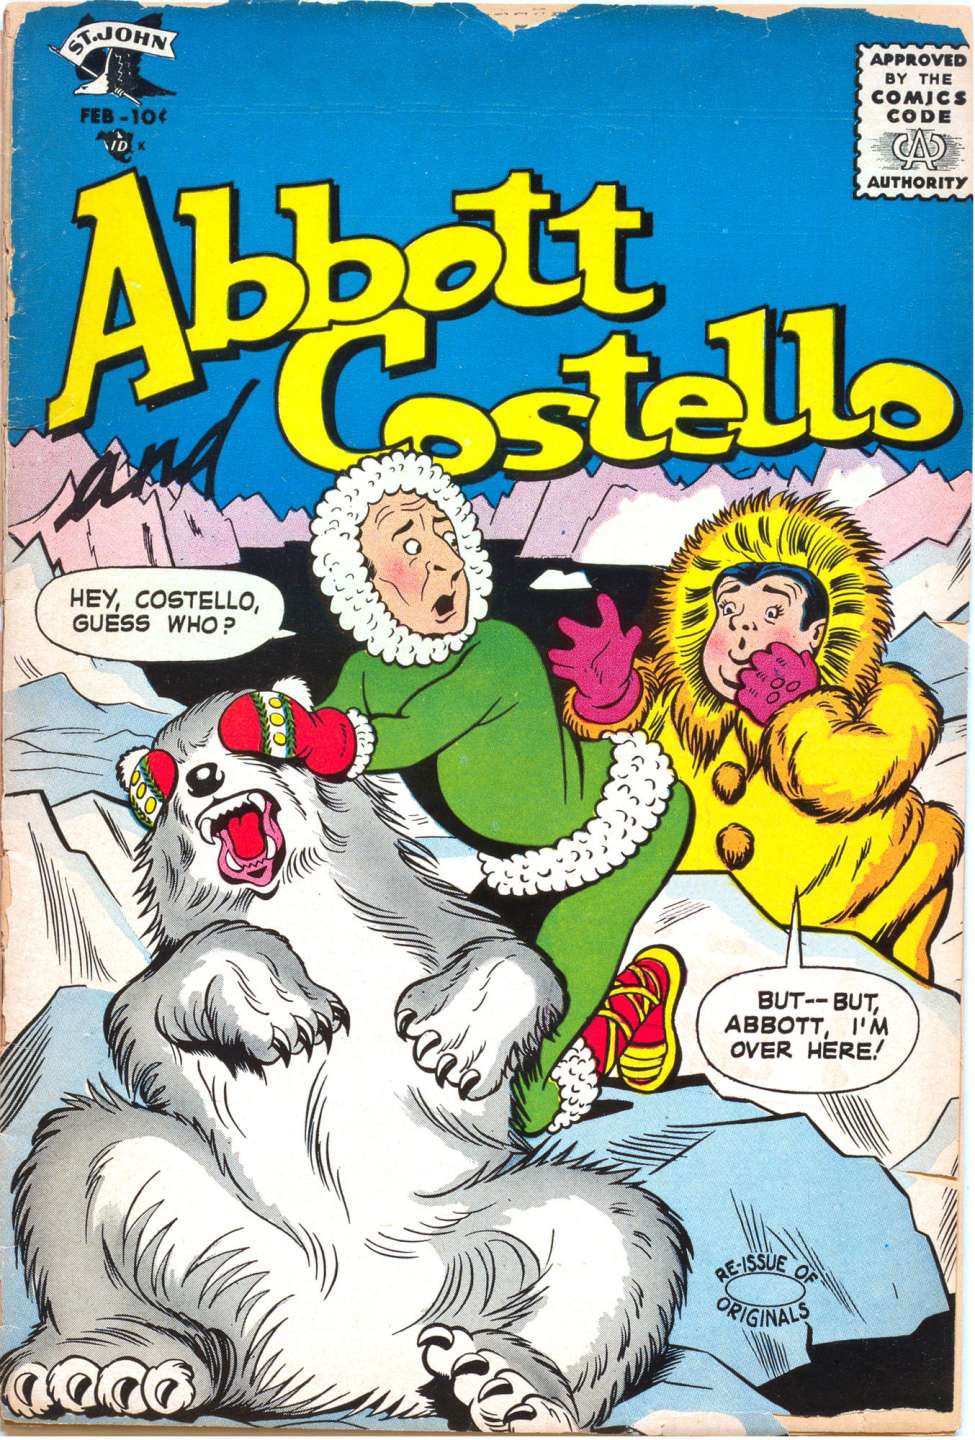 Book Cover For Abbott and Costello Comics 36